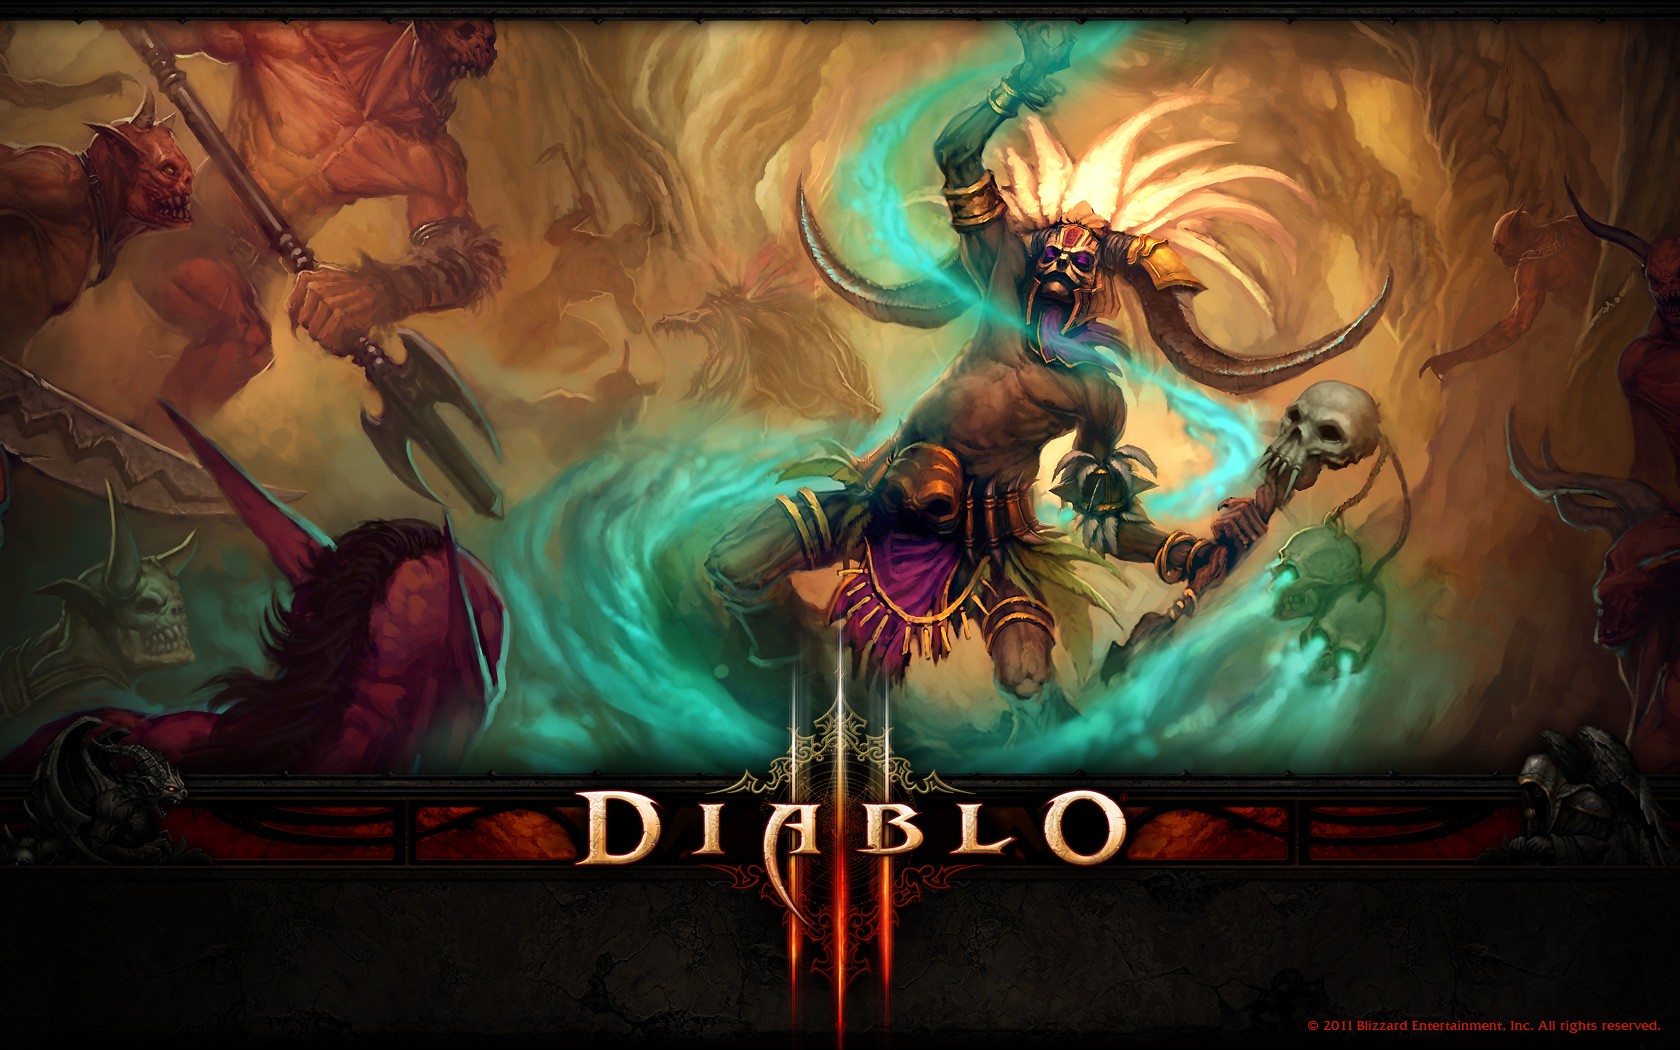 General 1680x1050 Blizzard Entertainment Diablo Diablo III Witch Doctor (character) video games skull warrior PC gaming 2011 (Year)